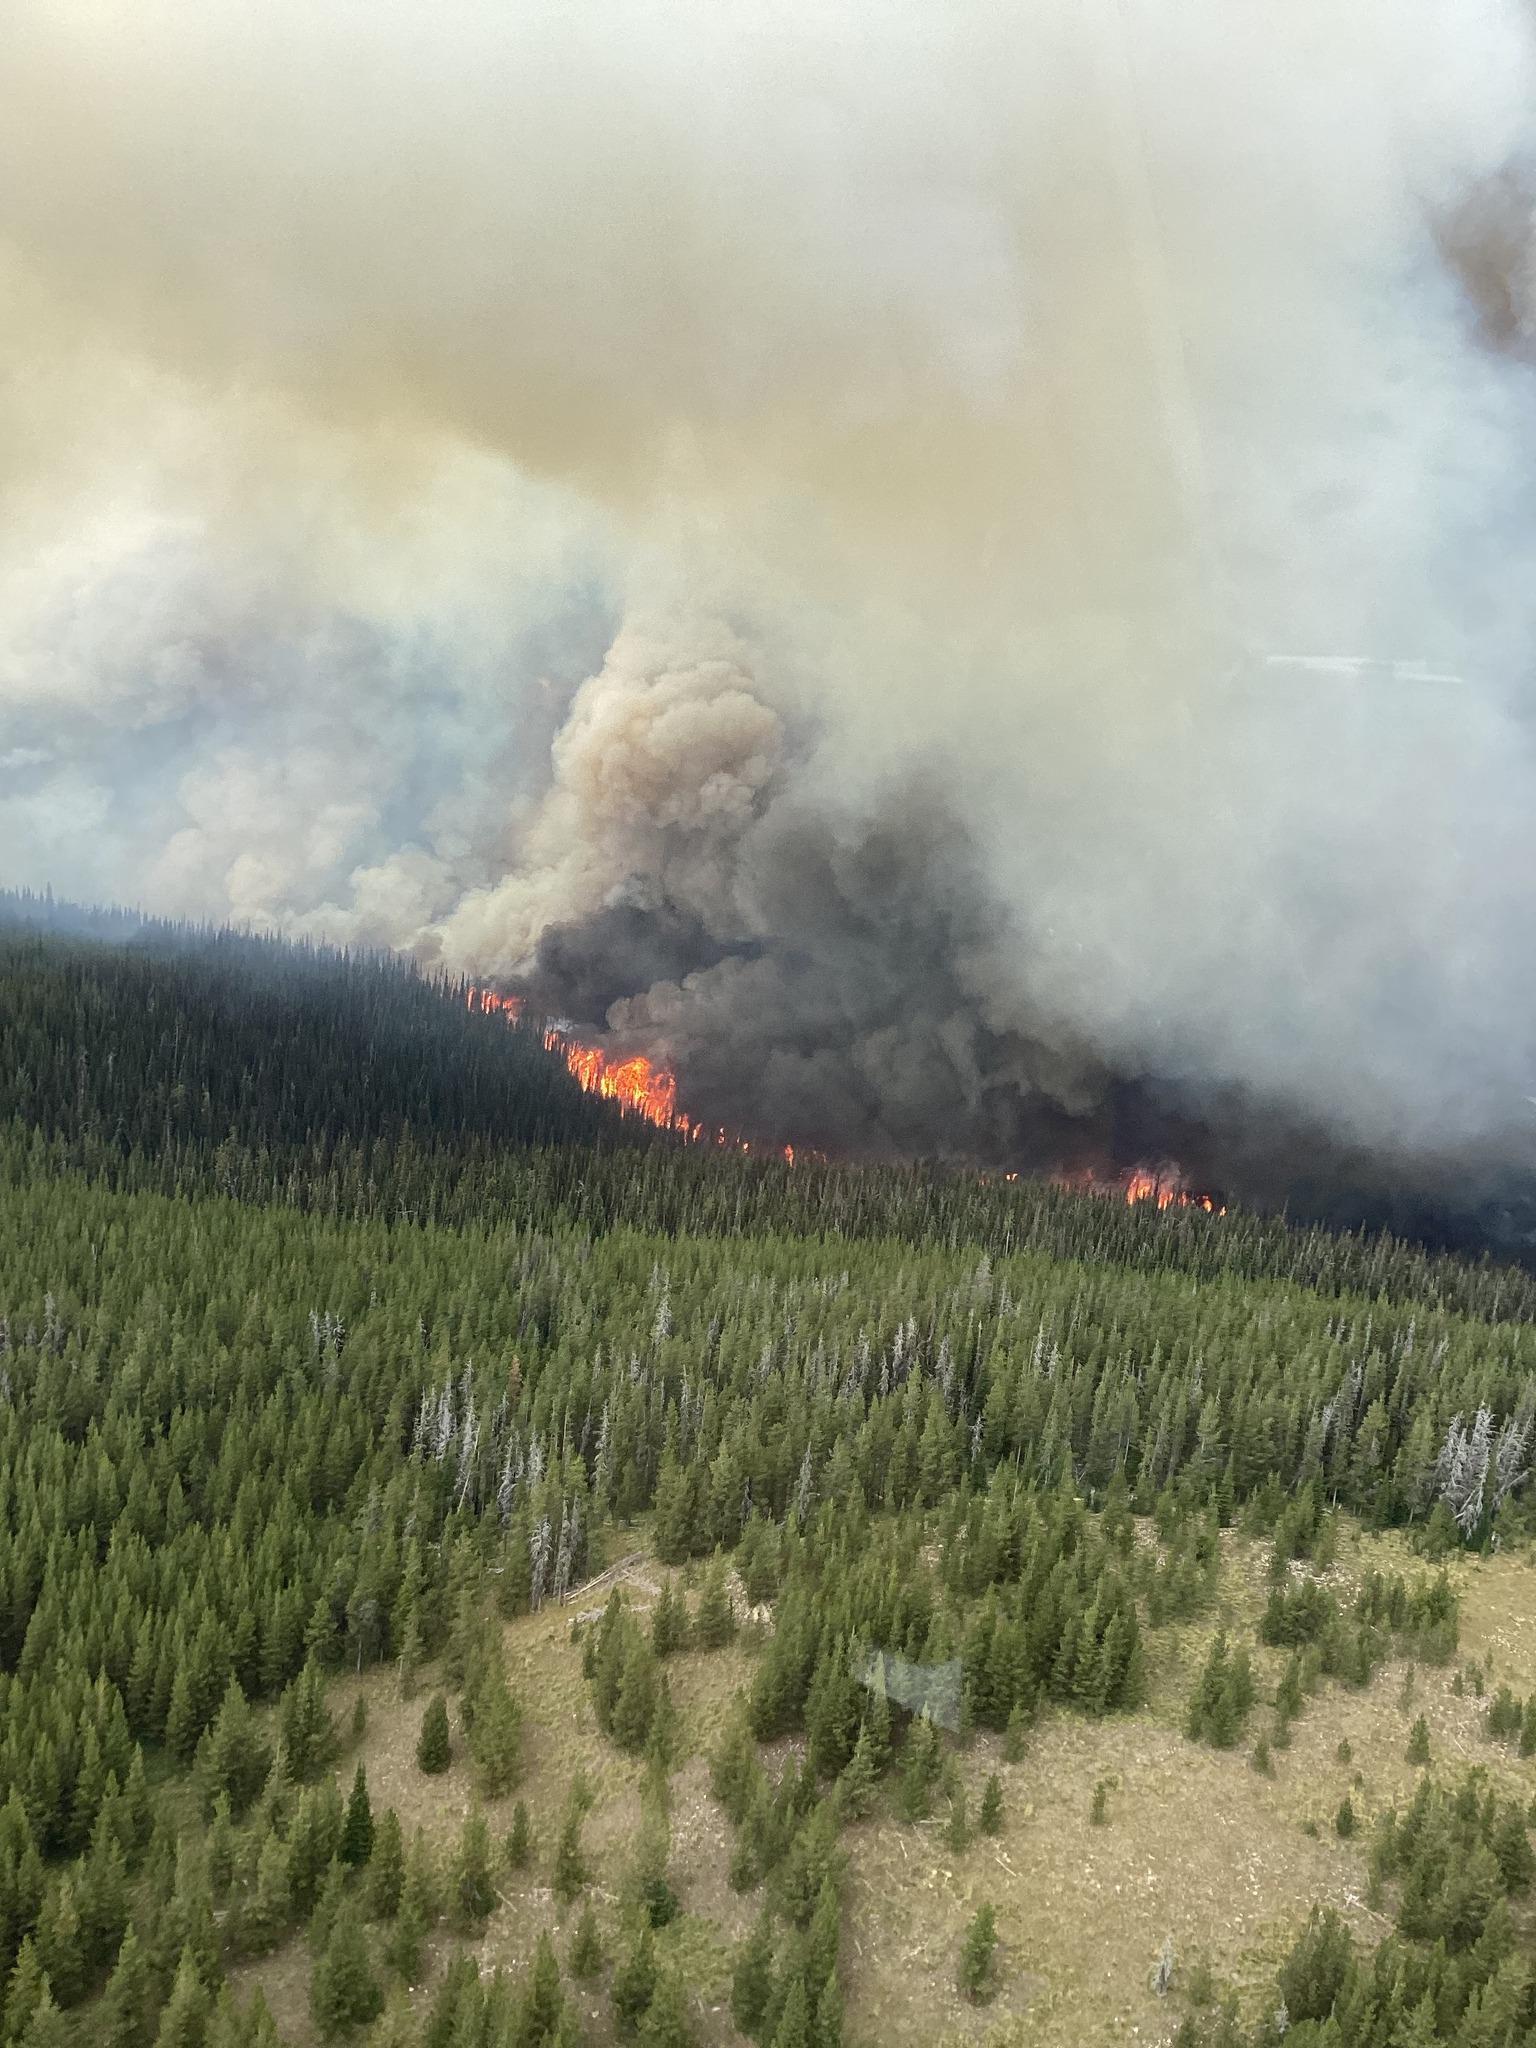 Wildfire flames can be seen among smoke in the distance as a wildfire burns in the forest